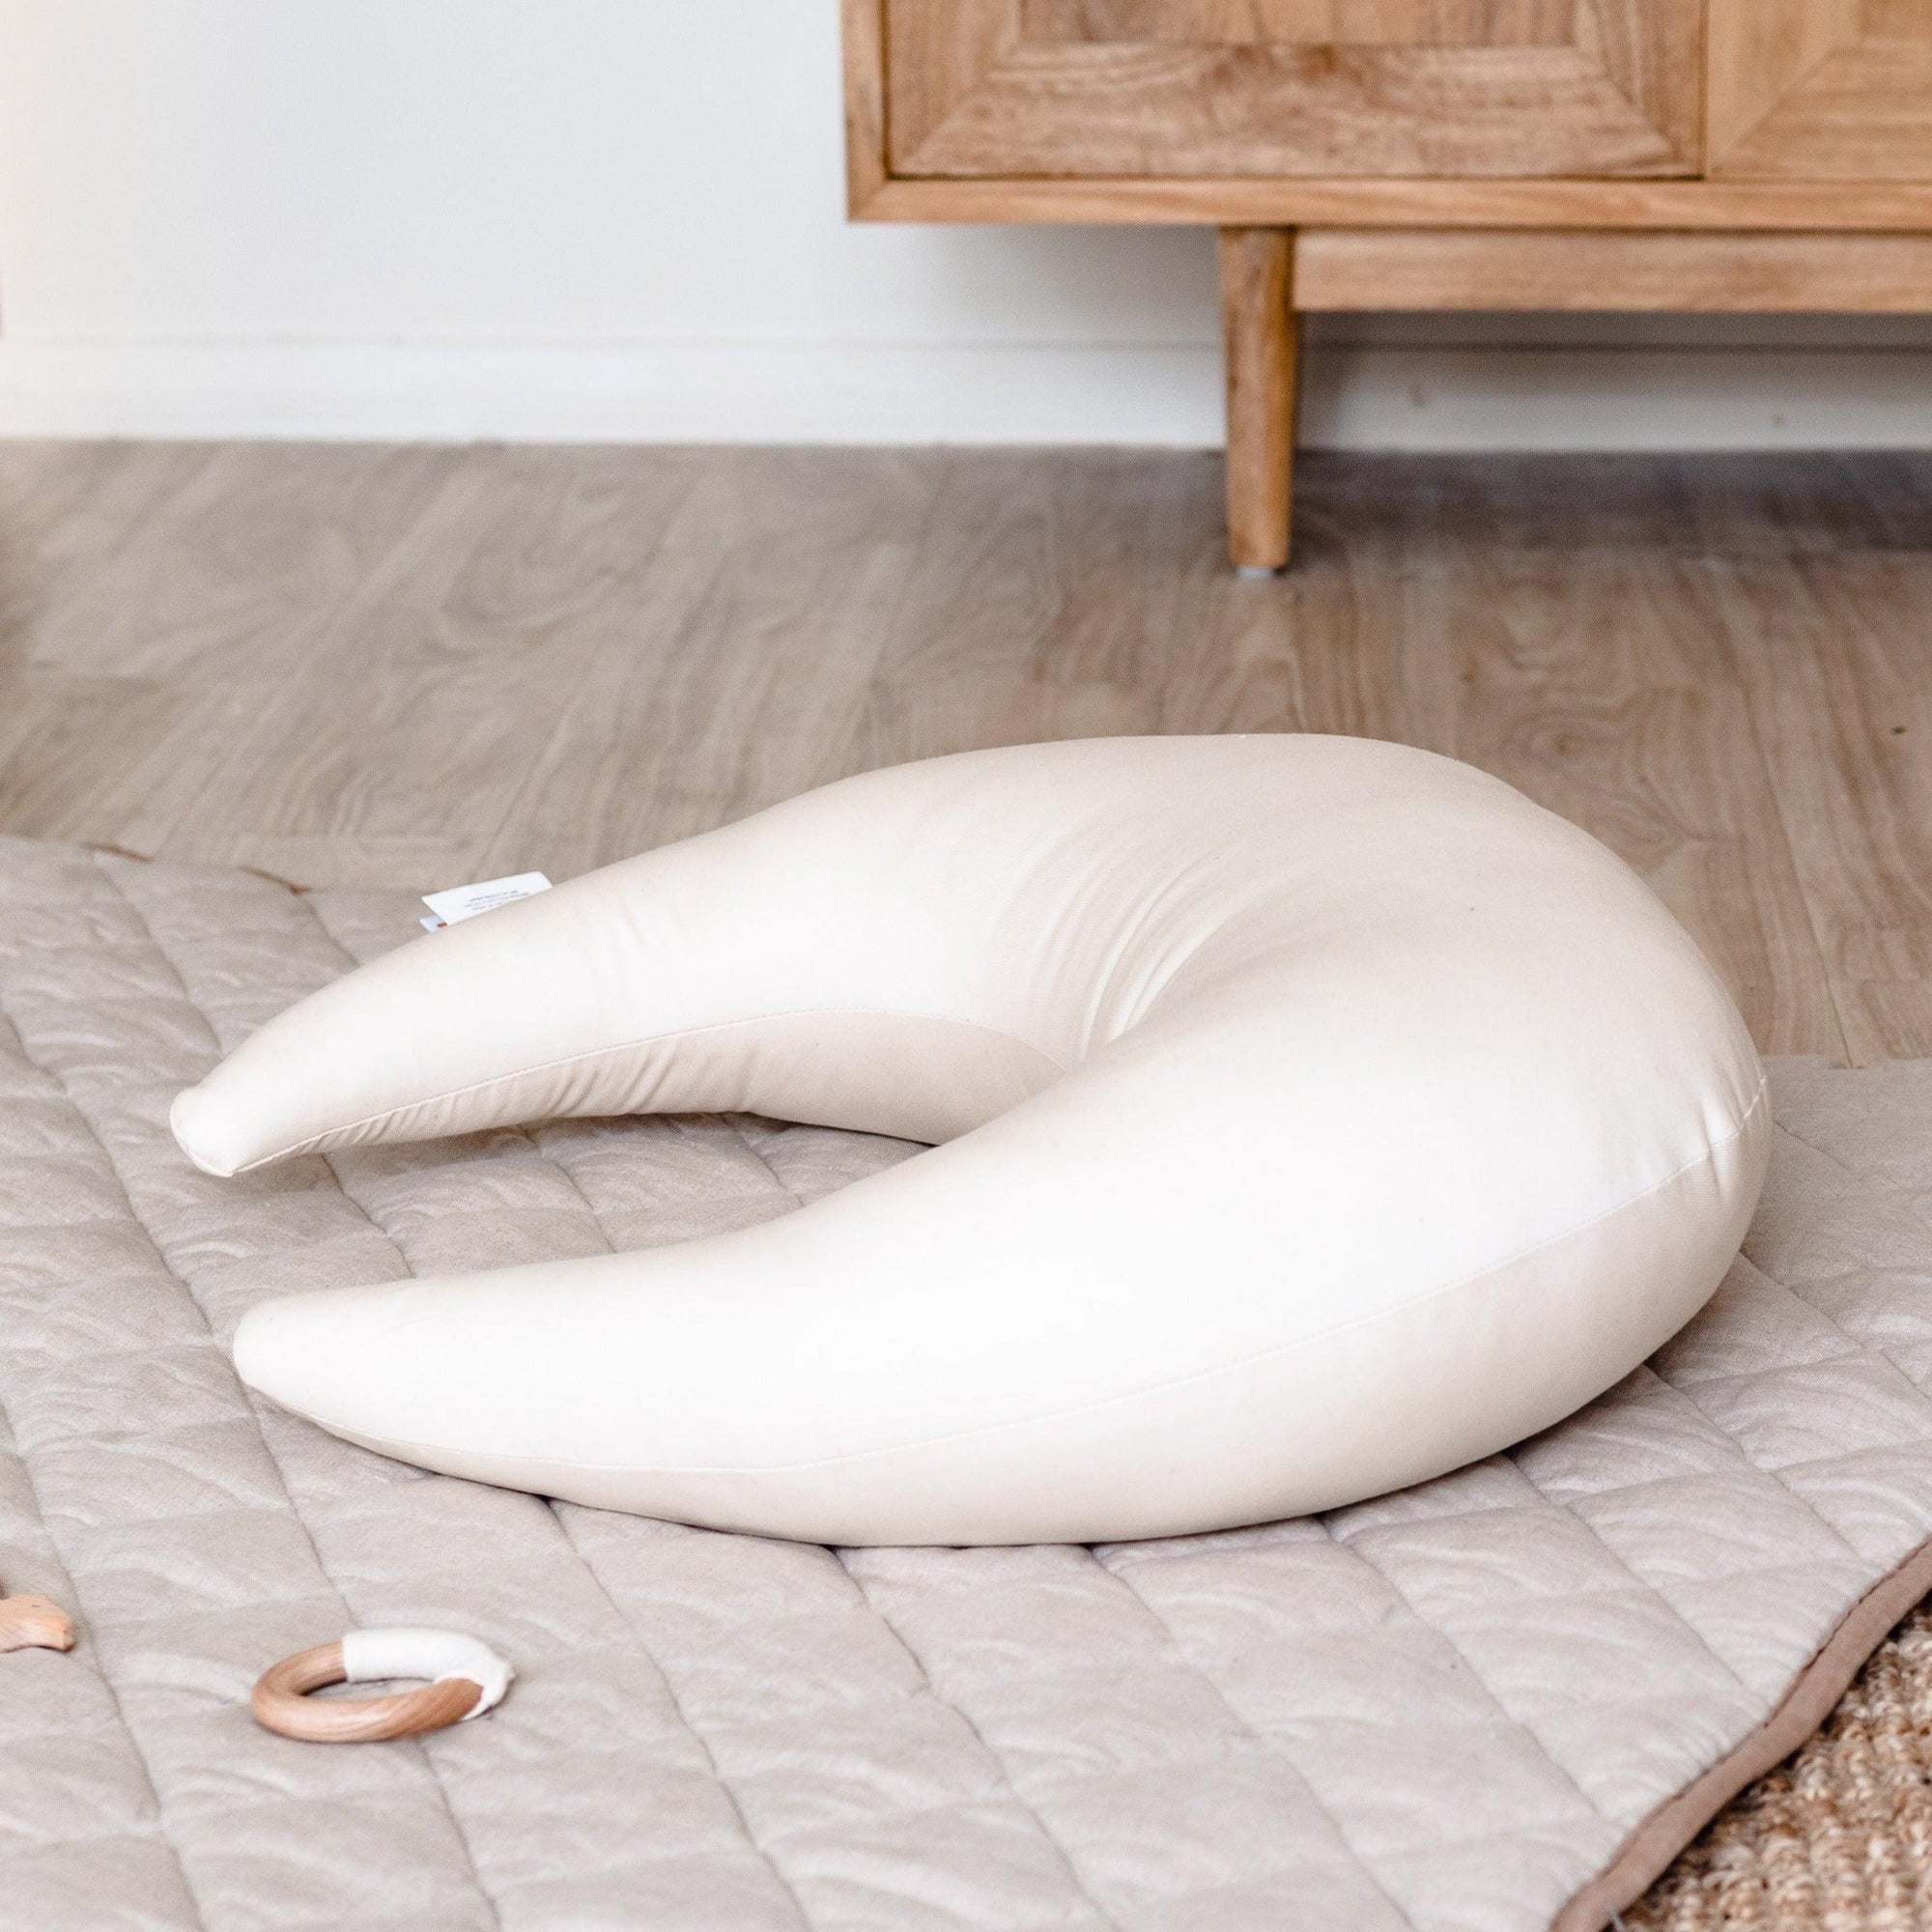 A white Snuggle Me Feeding & Support pillow on a rug next to a wooden toy.